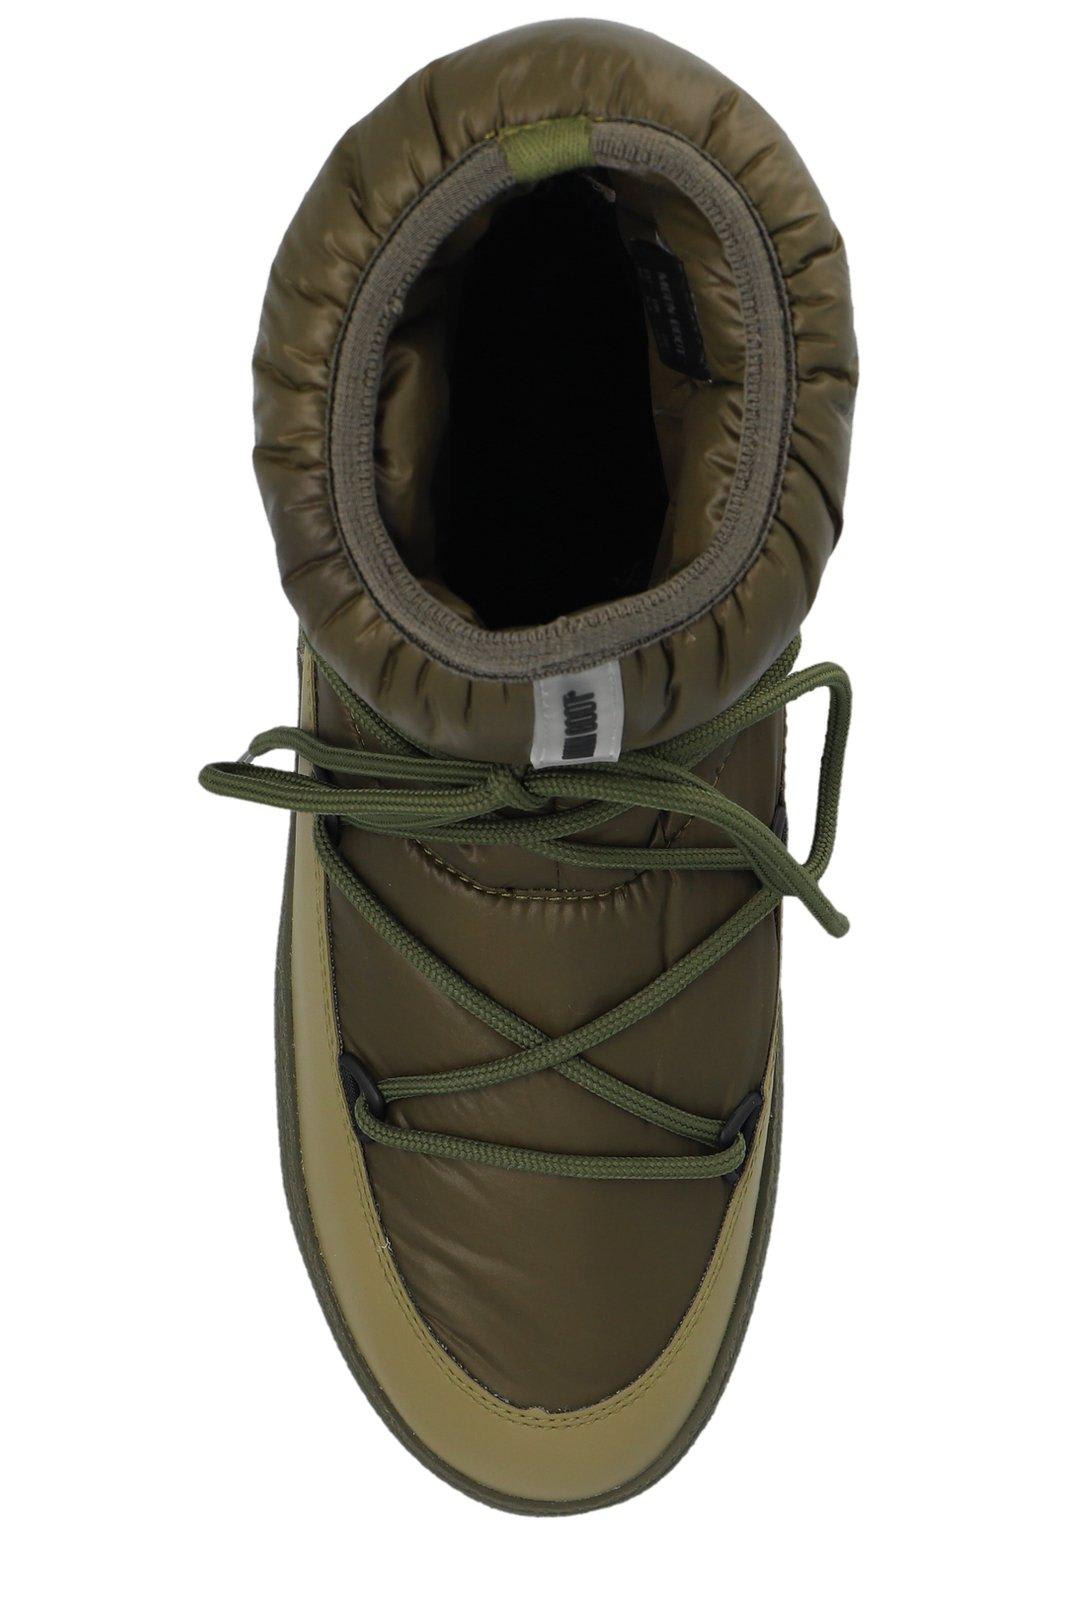 Shop Moon Boot Mtrack Low Padded Boots In Verde